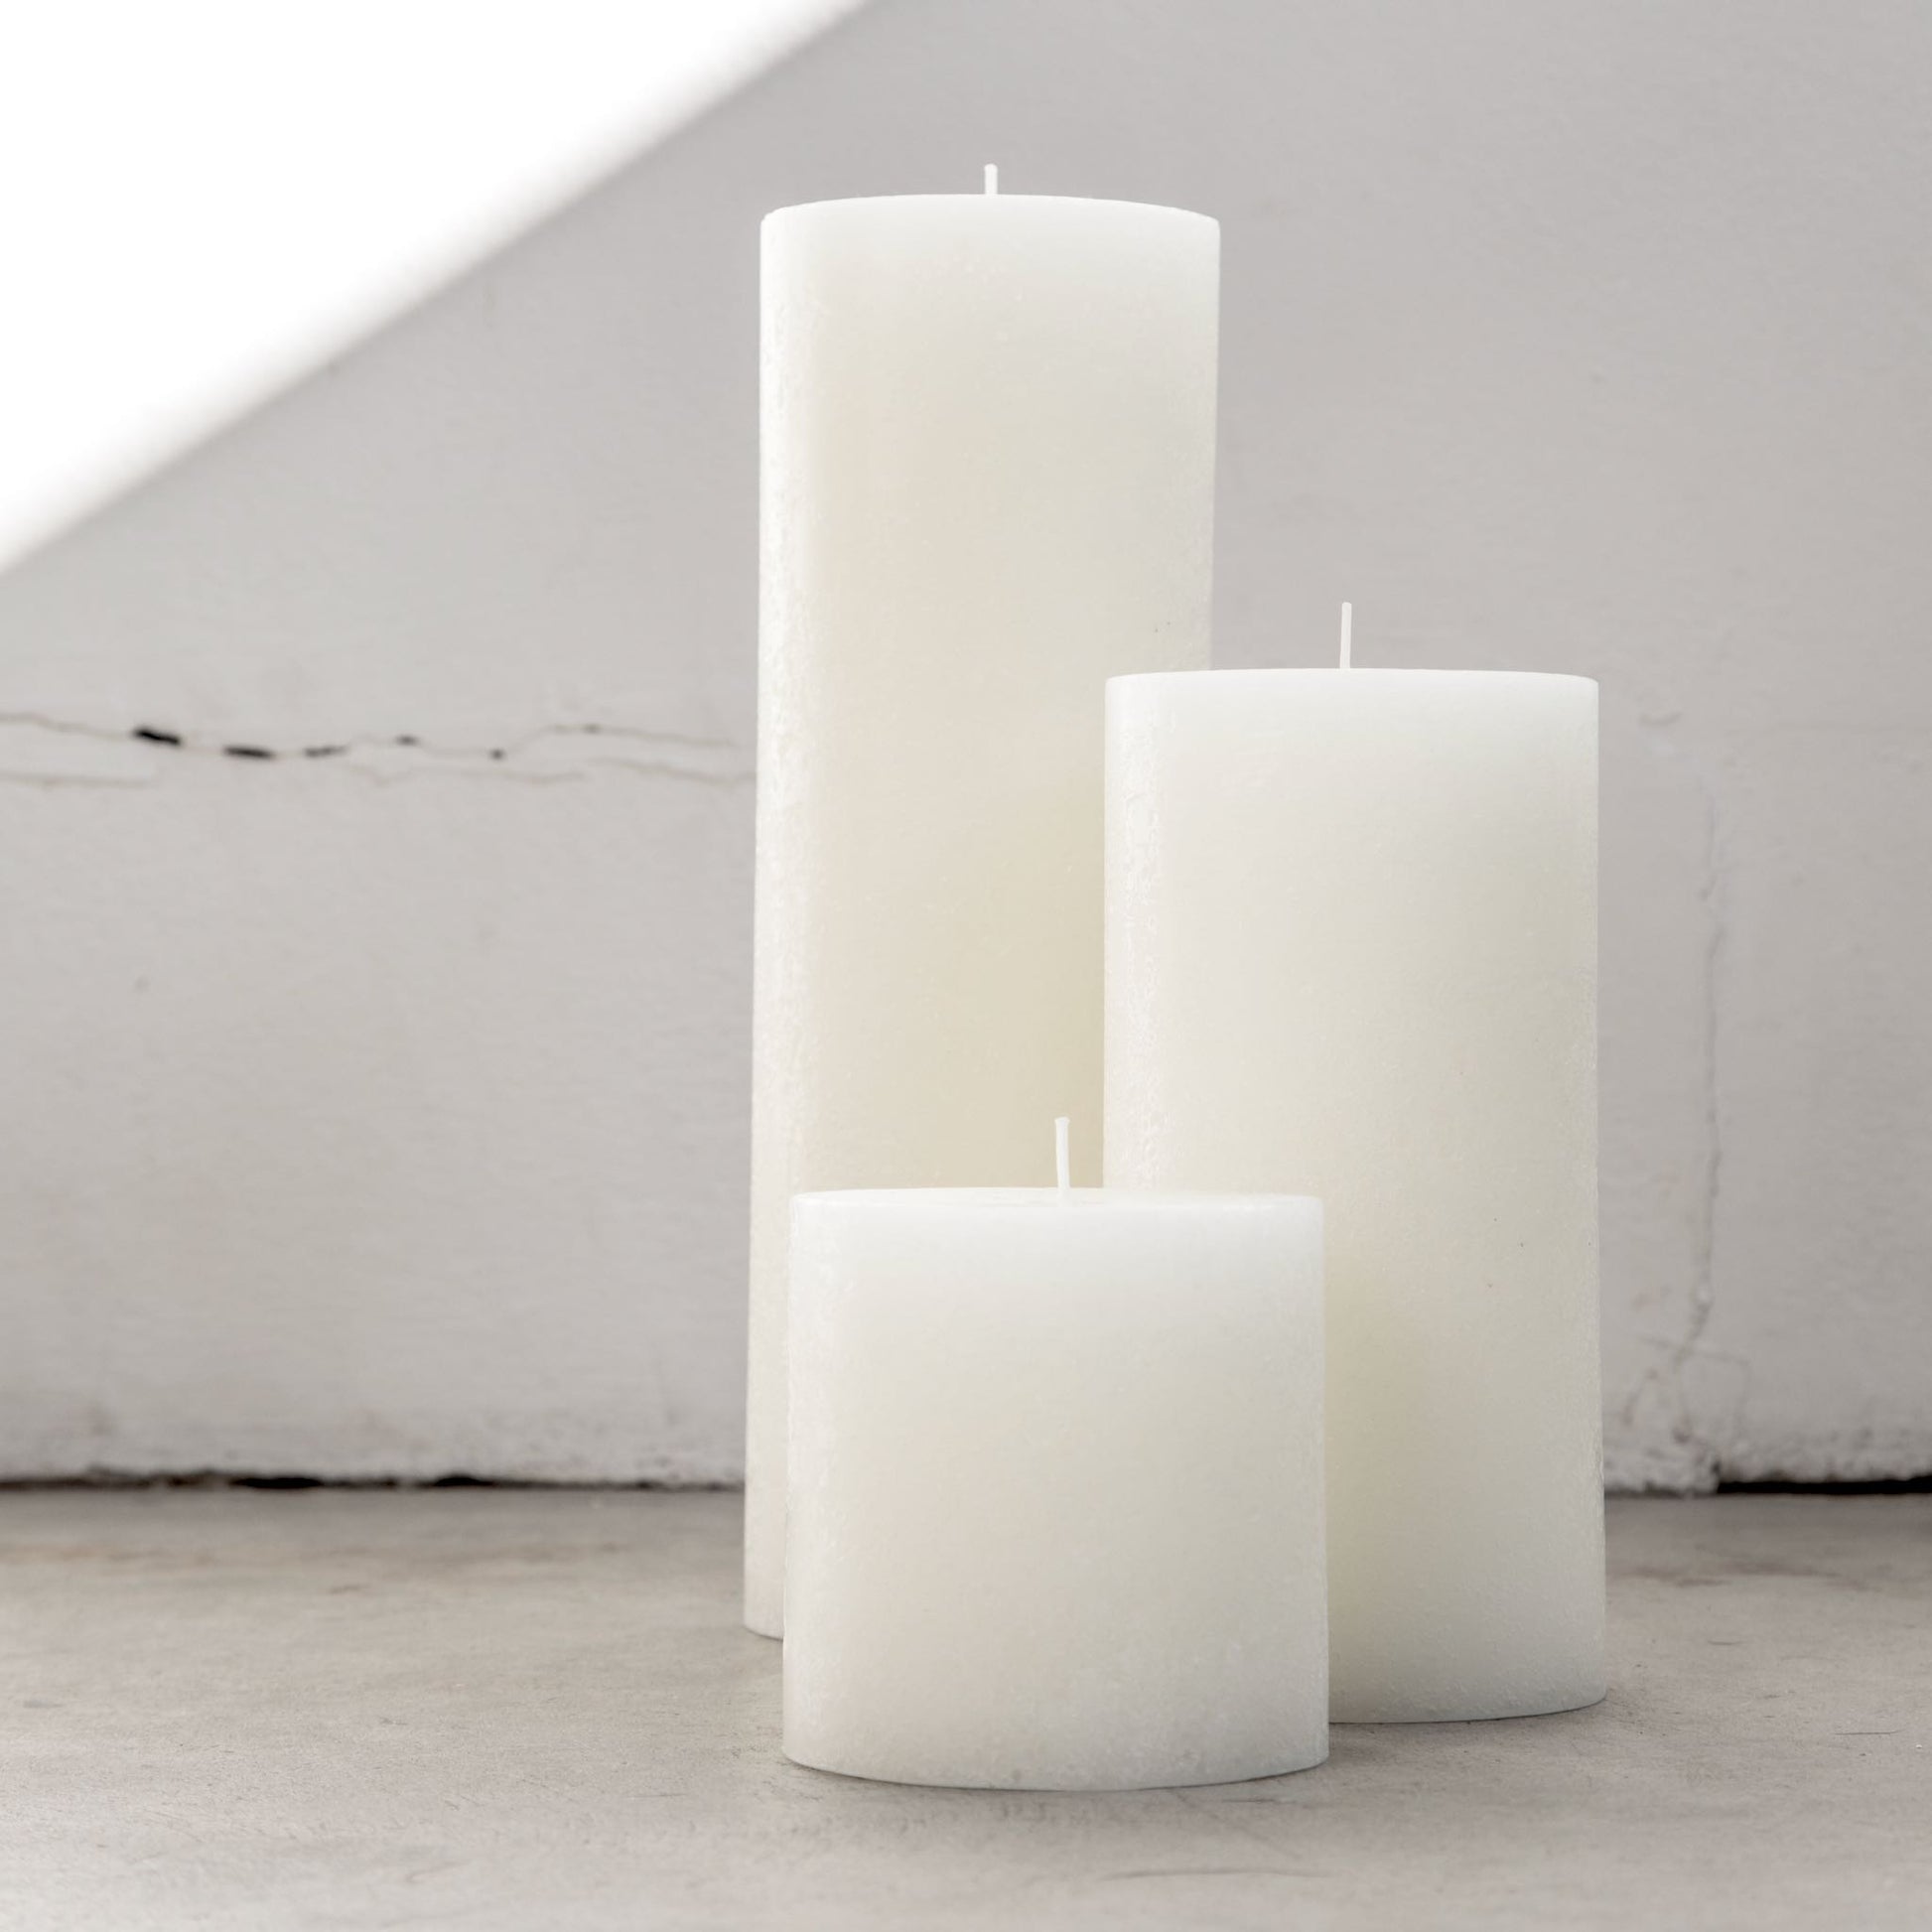 Large textured candles in warm white